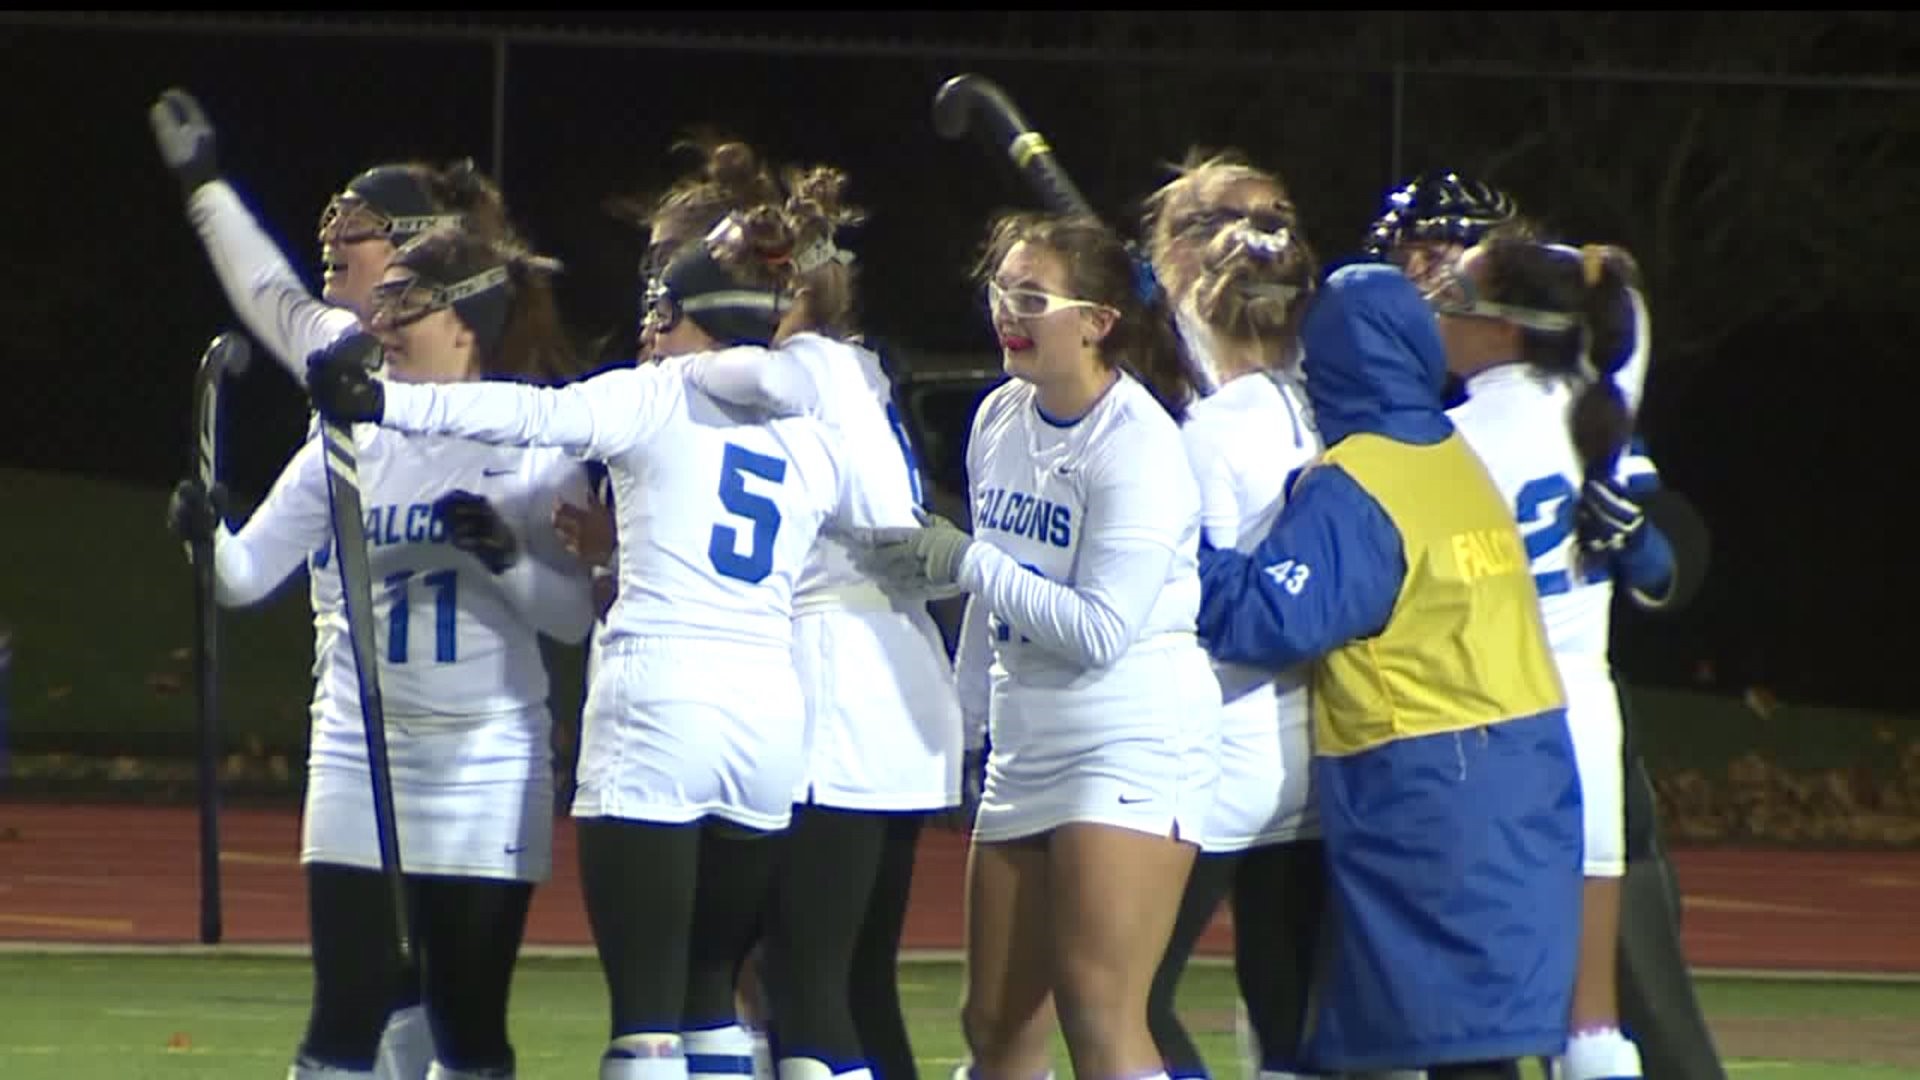 Lower Dauphin beats Hershey to head to 3A States